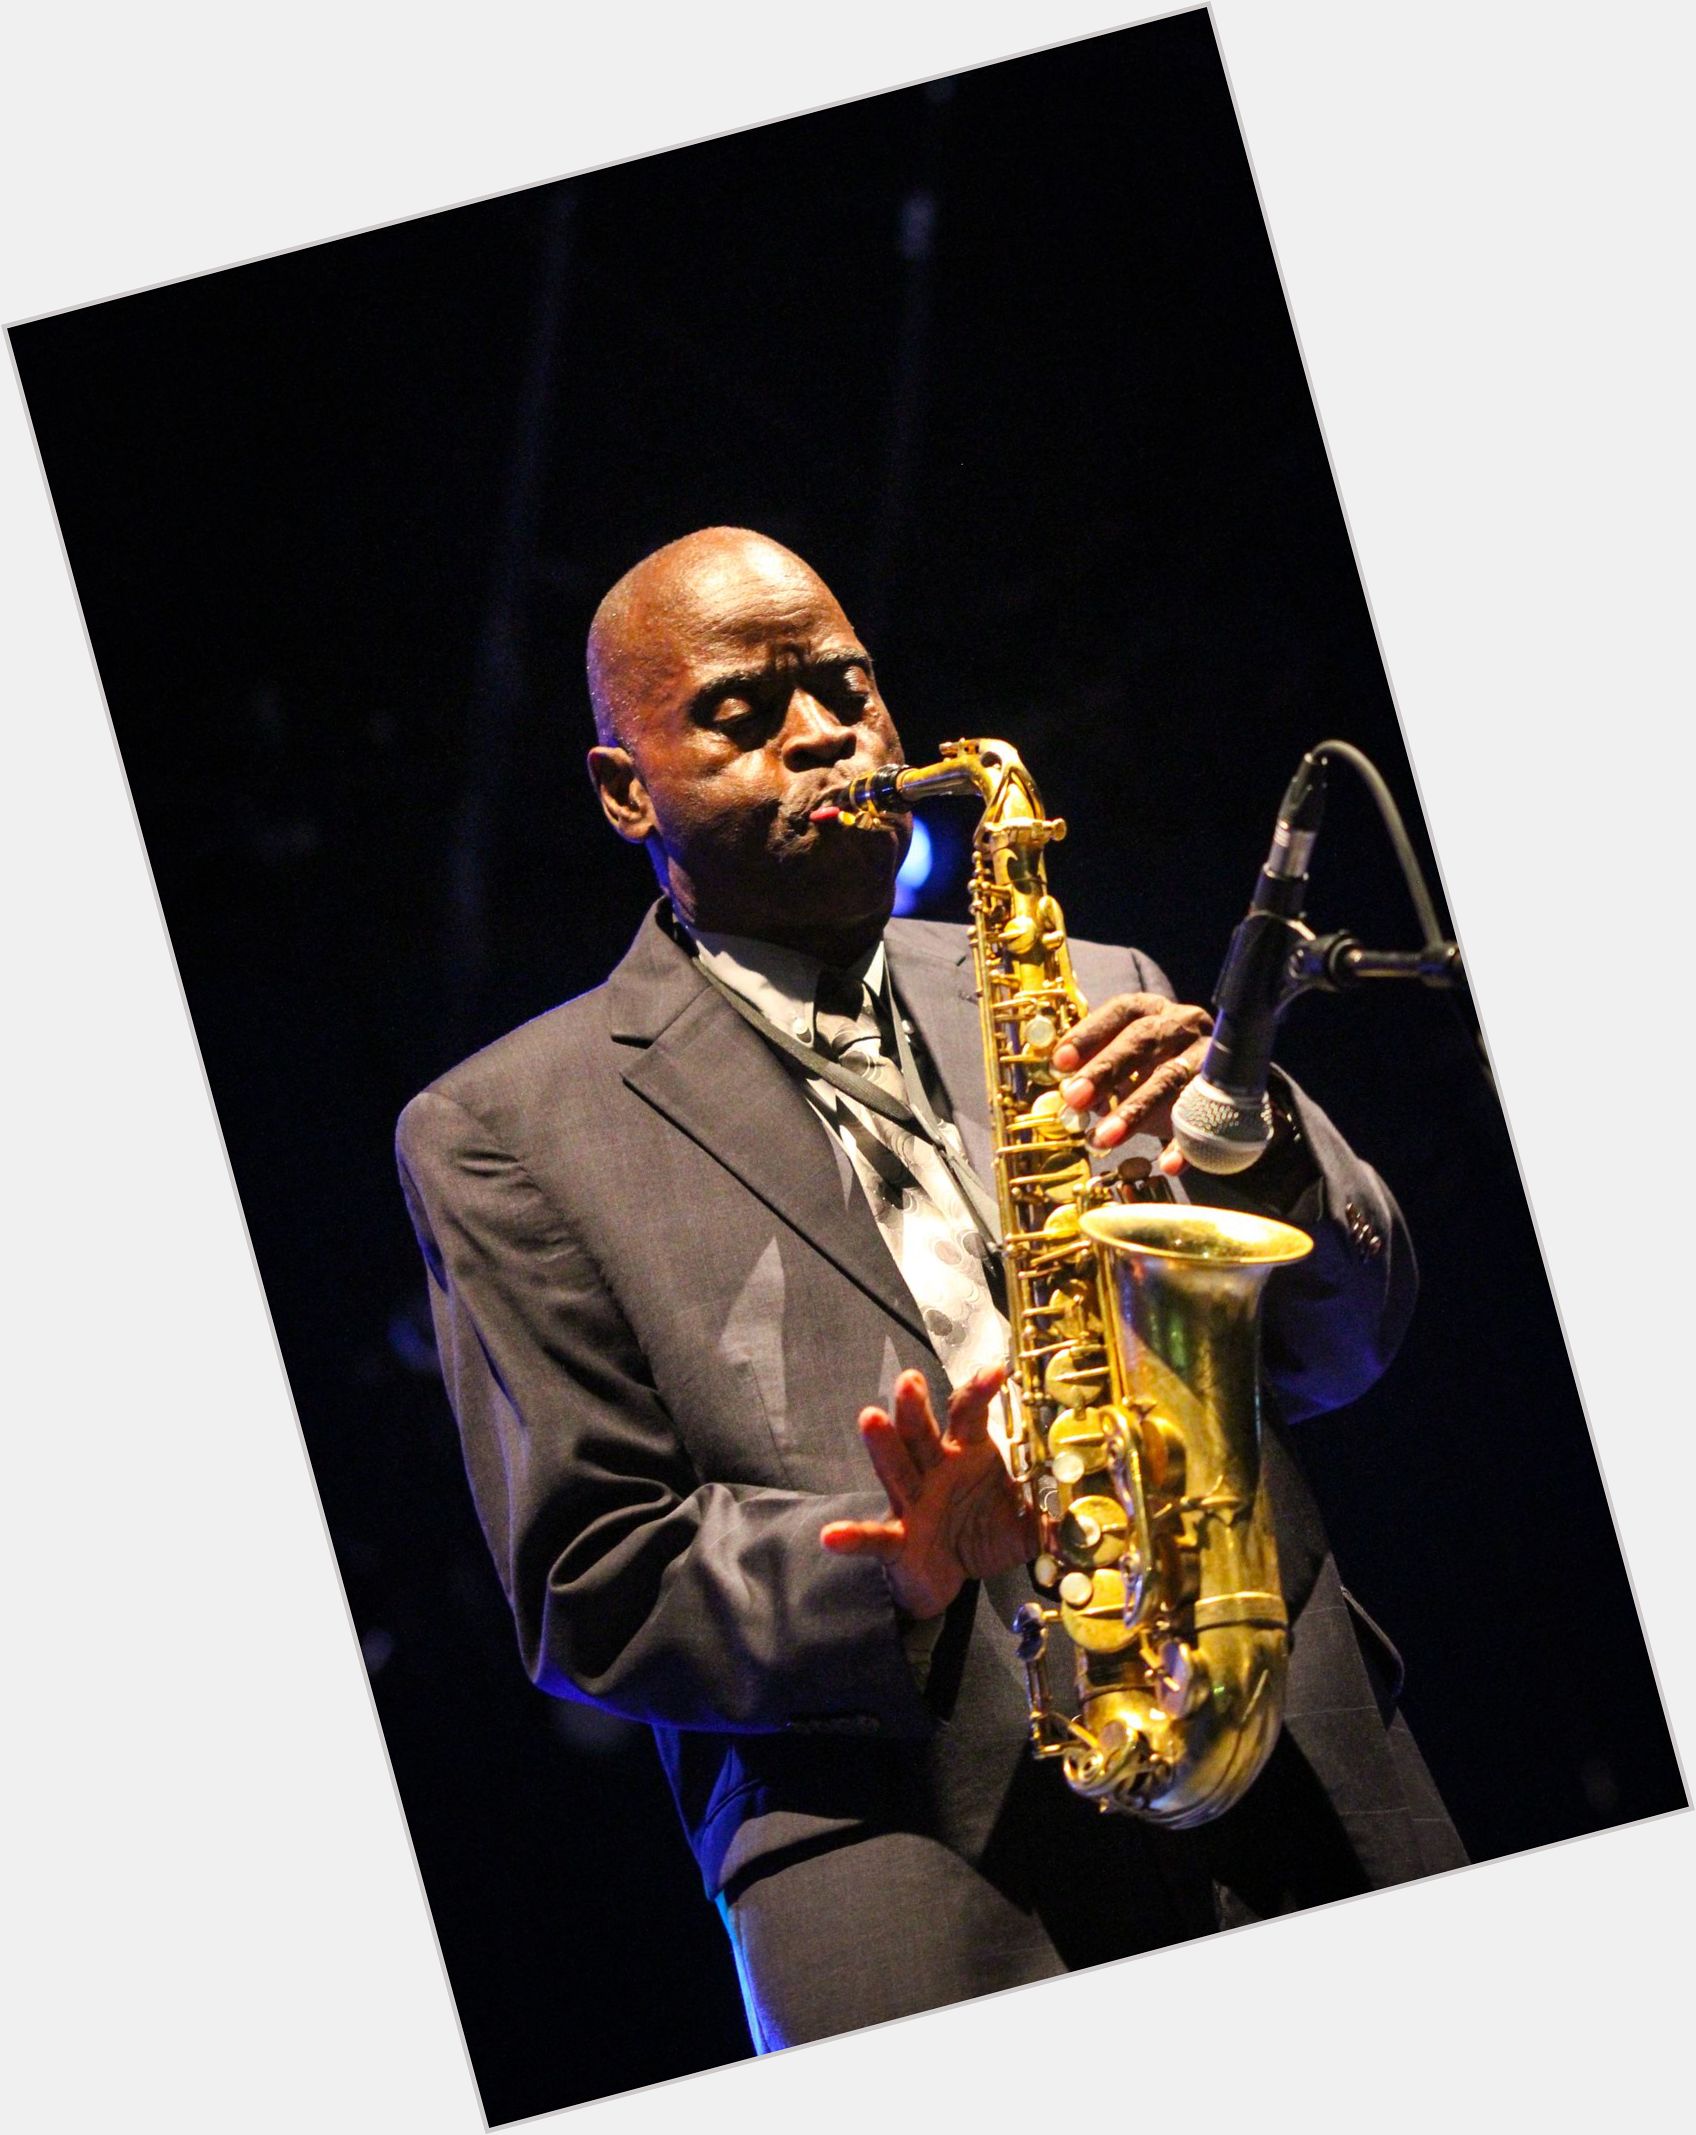 Maceo Parker dating 1